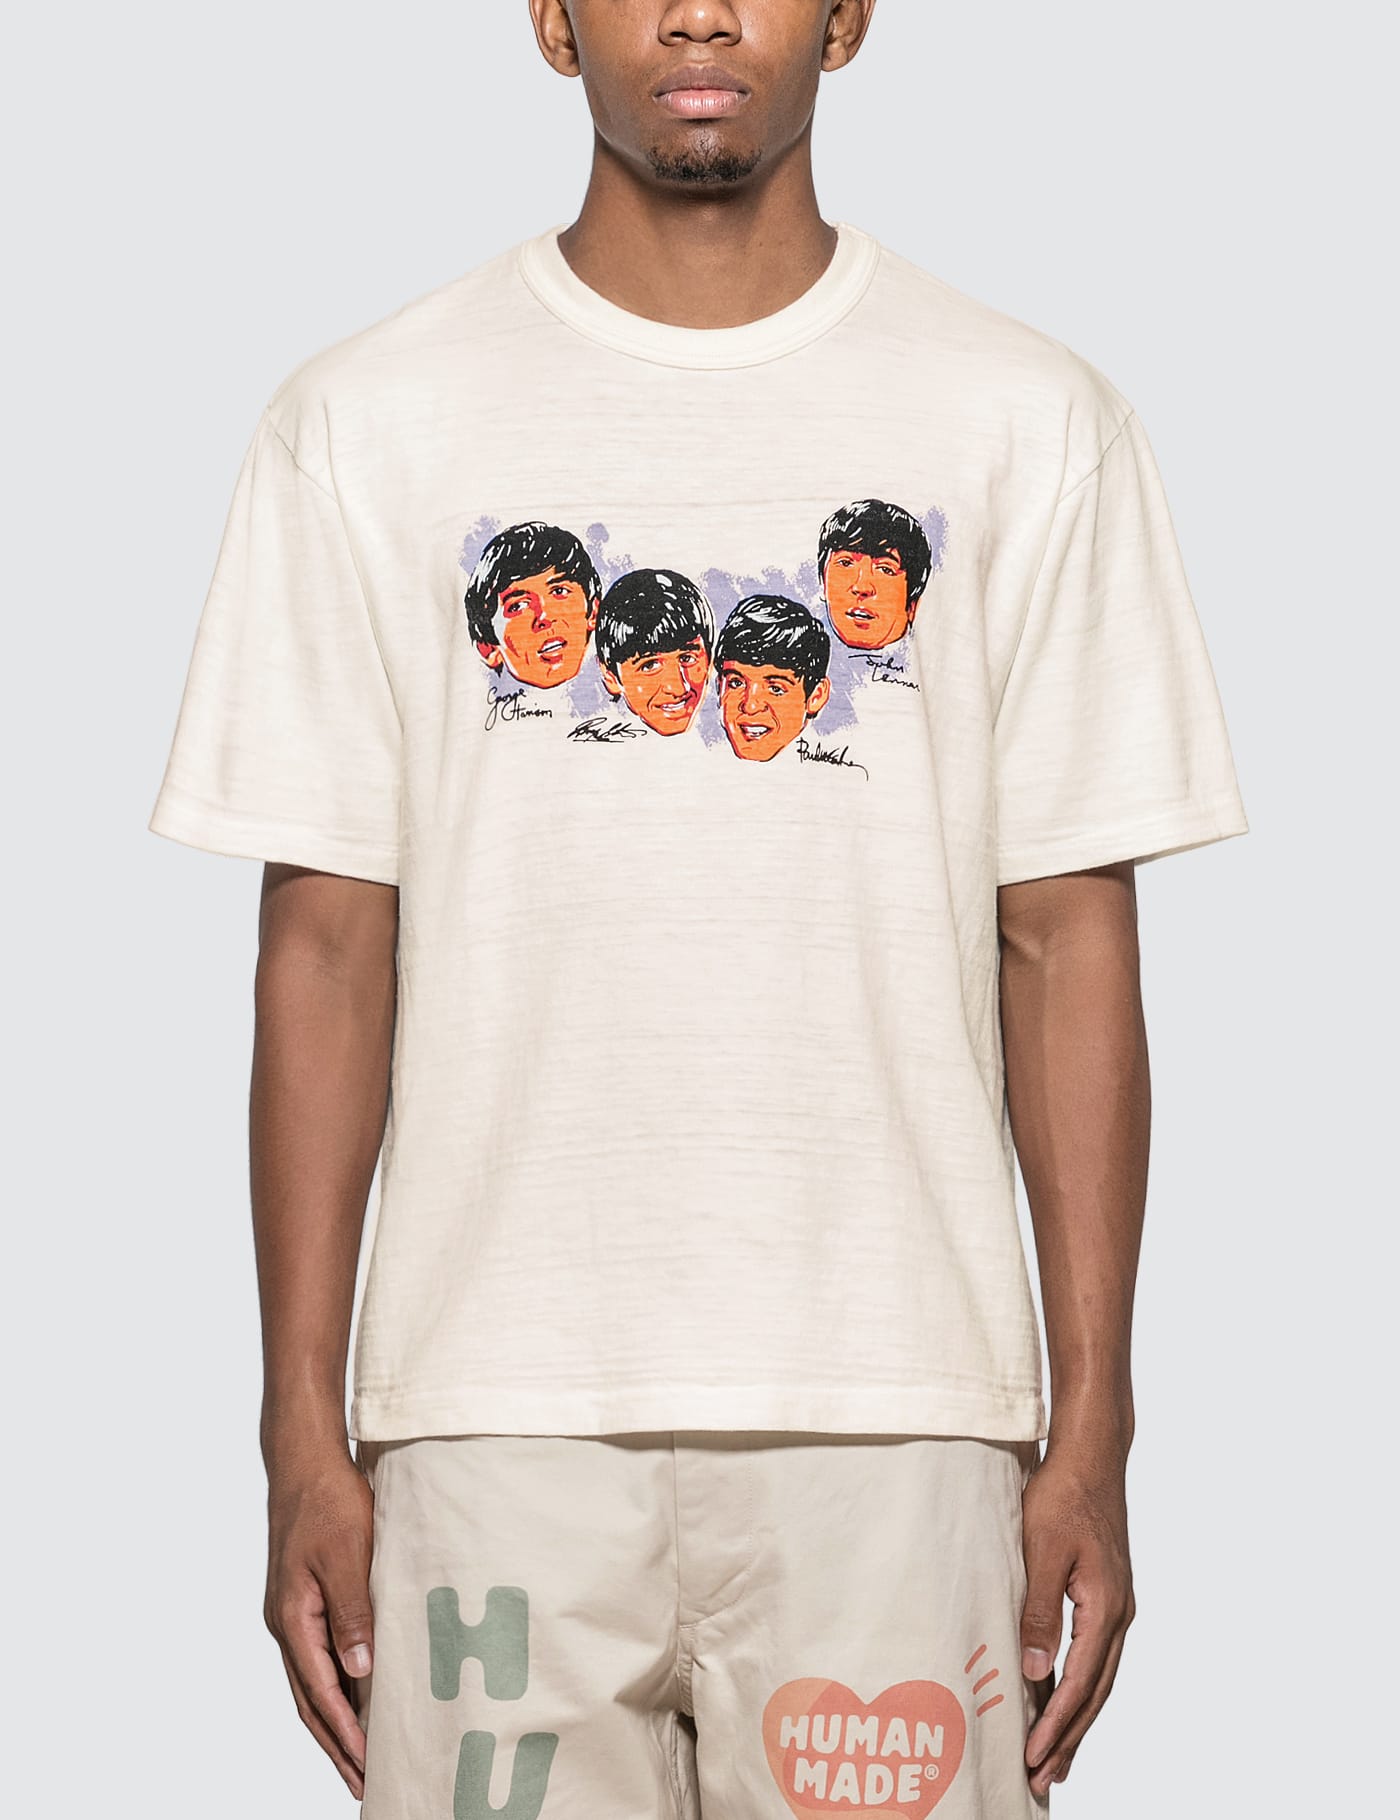 Human Made - Beatles T-Shirt | HBX - Globally Curated Fashion and 